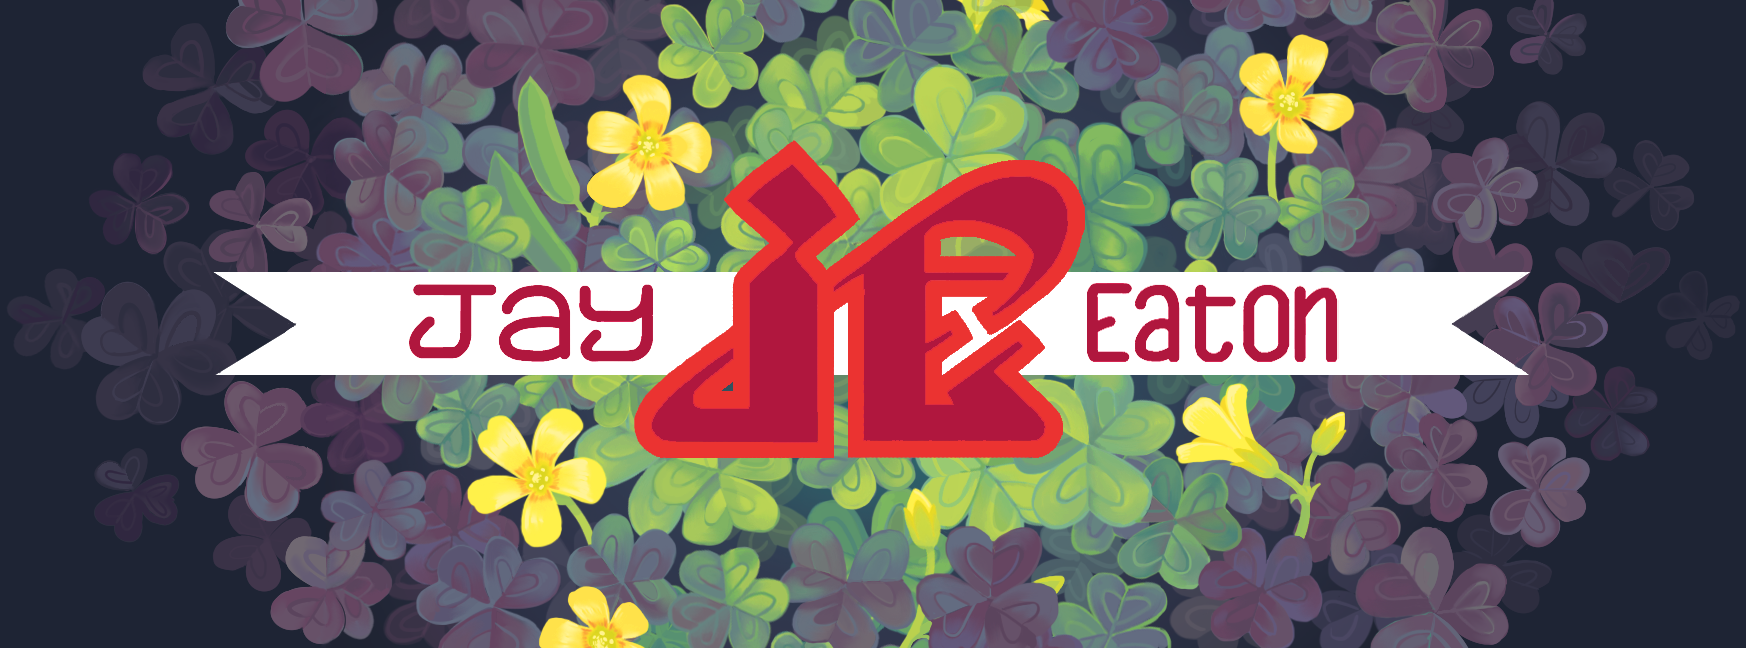 A banner reading Jay Eaton lies over a bed of flowering Oxalis corniculata. A large symbol in the middle combines the initials J, A, and E.